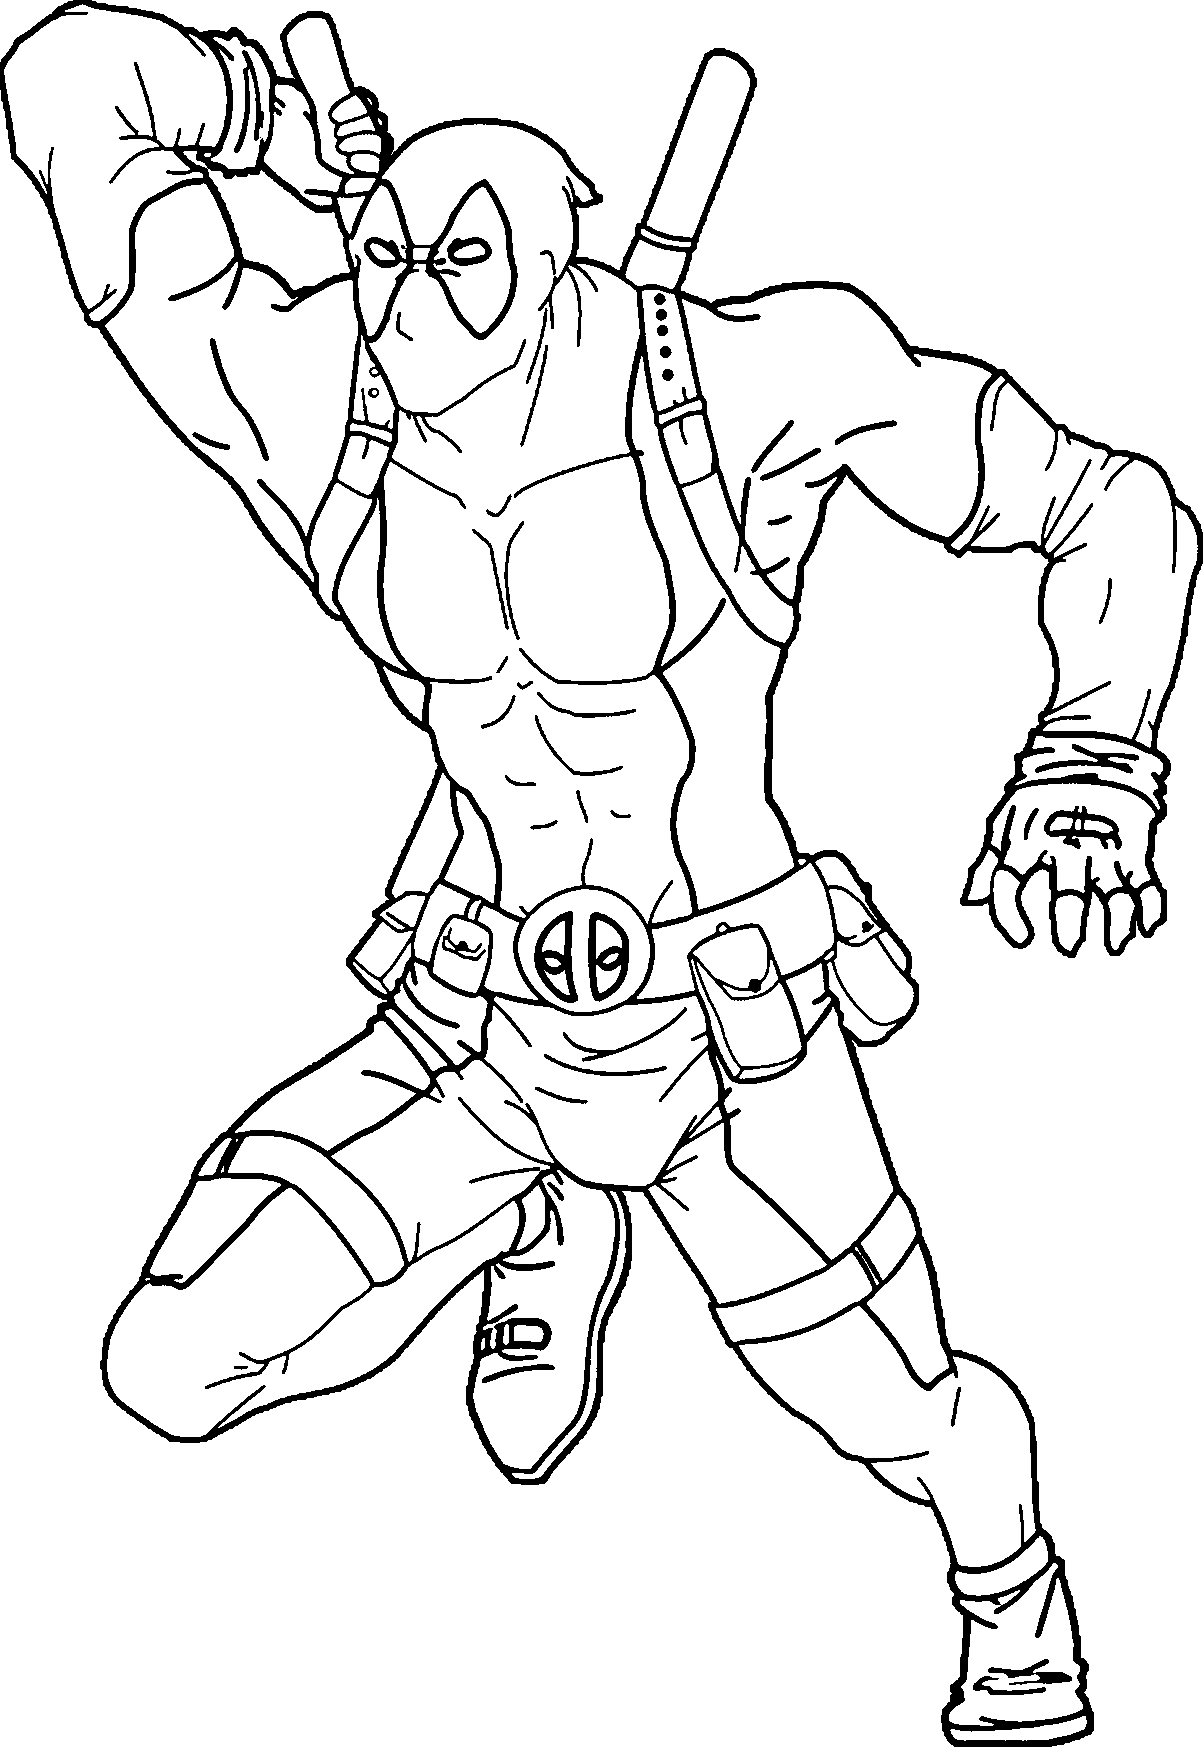 Free Coloring Pages Of Deadpool, Download Free Coloring Pages Of